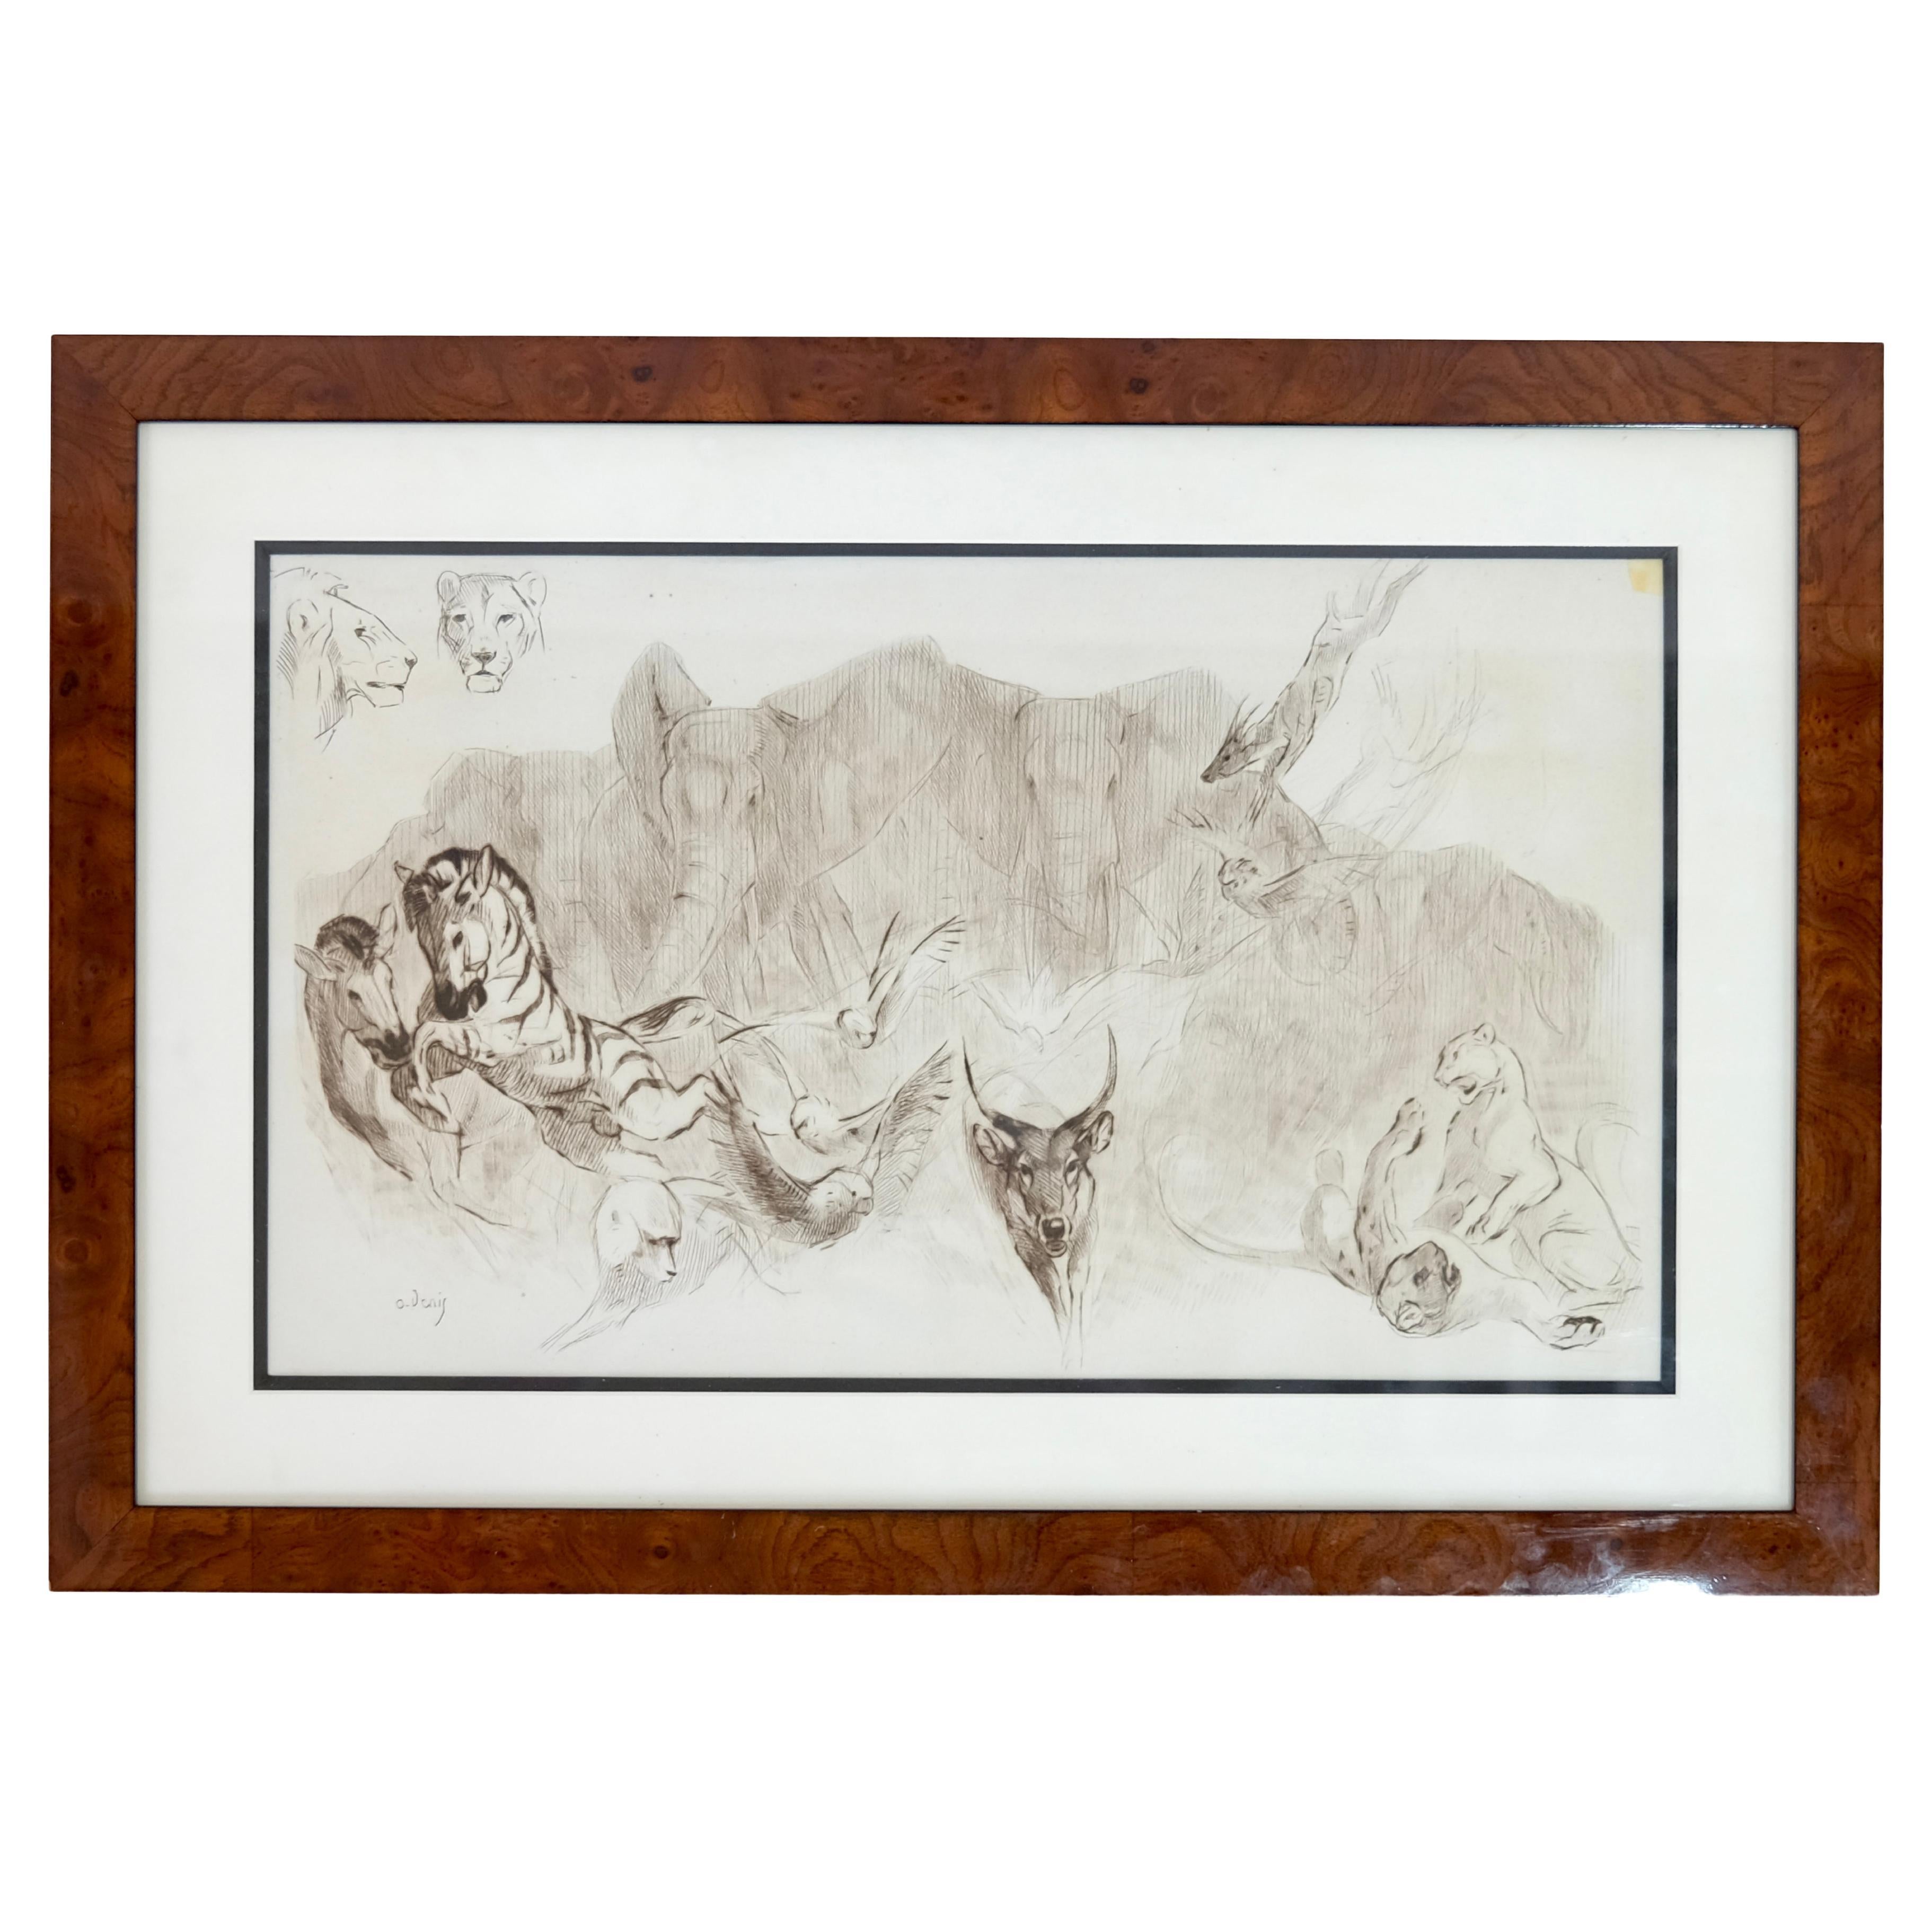 Etudes d'Animaux Sauvages, Etching and Drypoint by Odette Denis For Sale